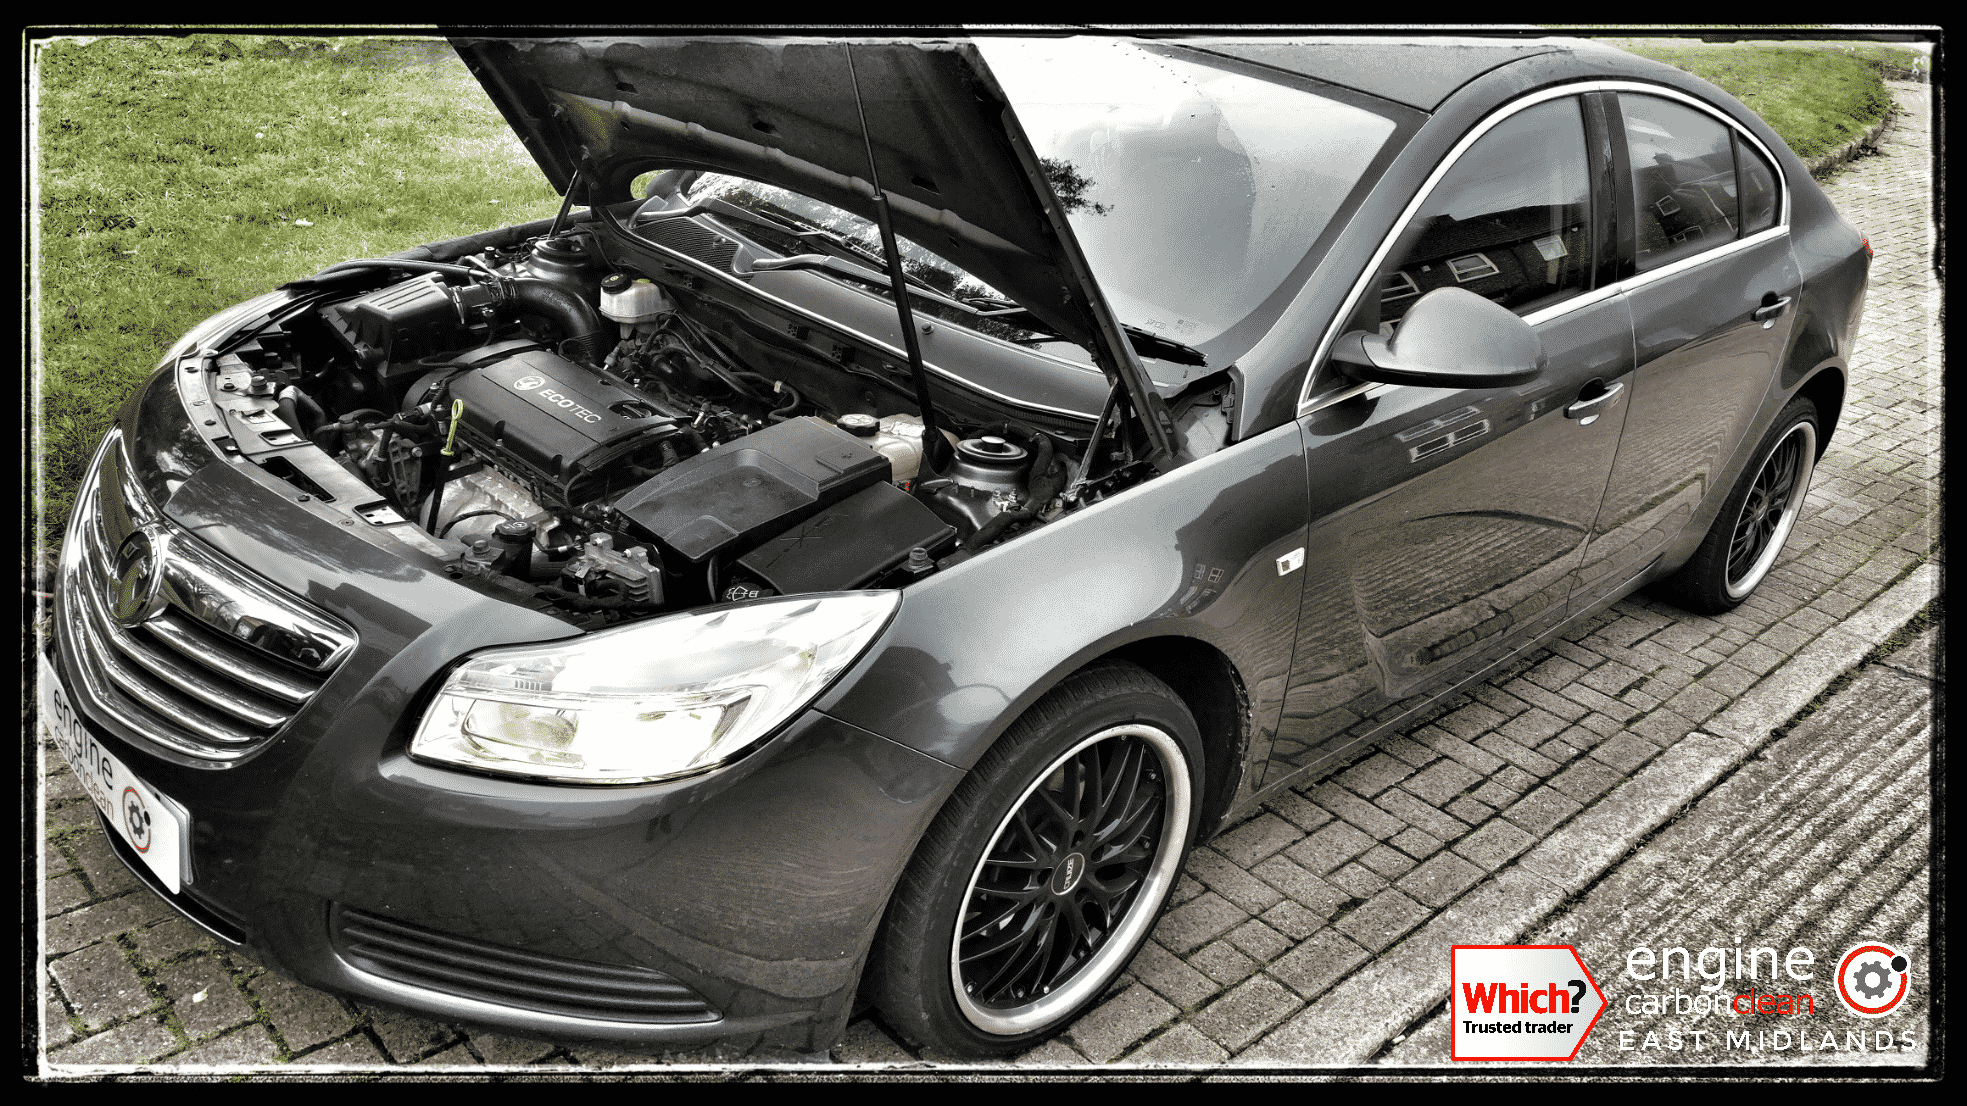 Engine Carbon Clean on a Vauxhall Insignia 1.8 petrol (2011 - 116,995 miles)